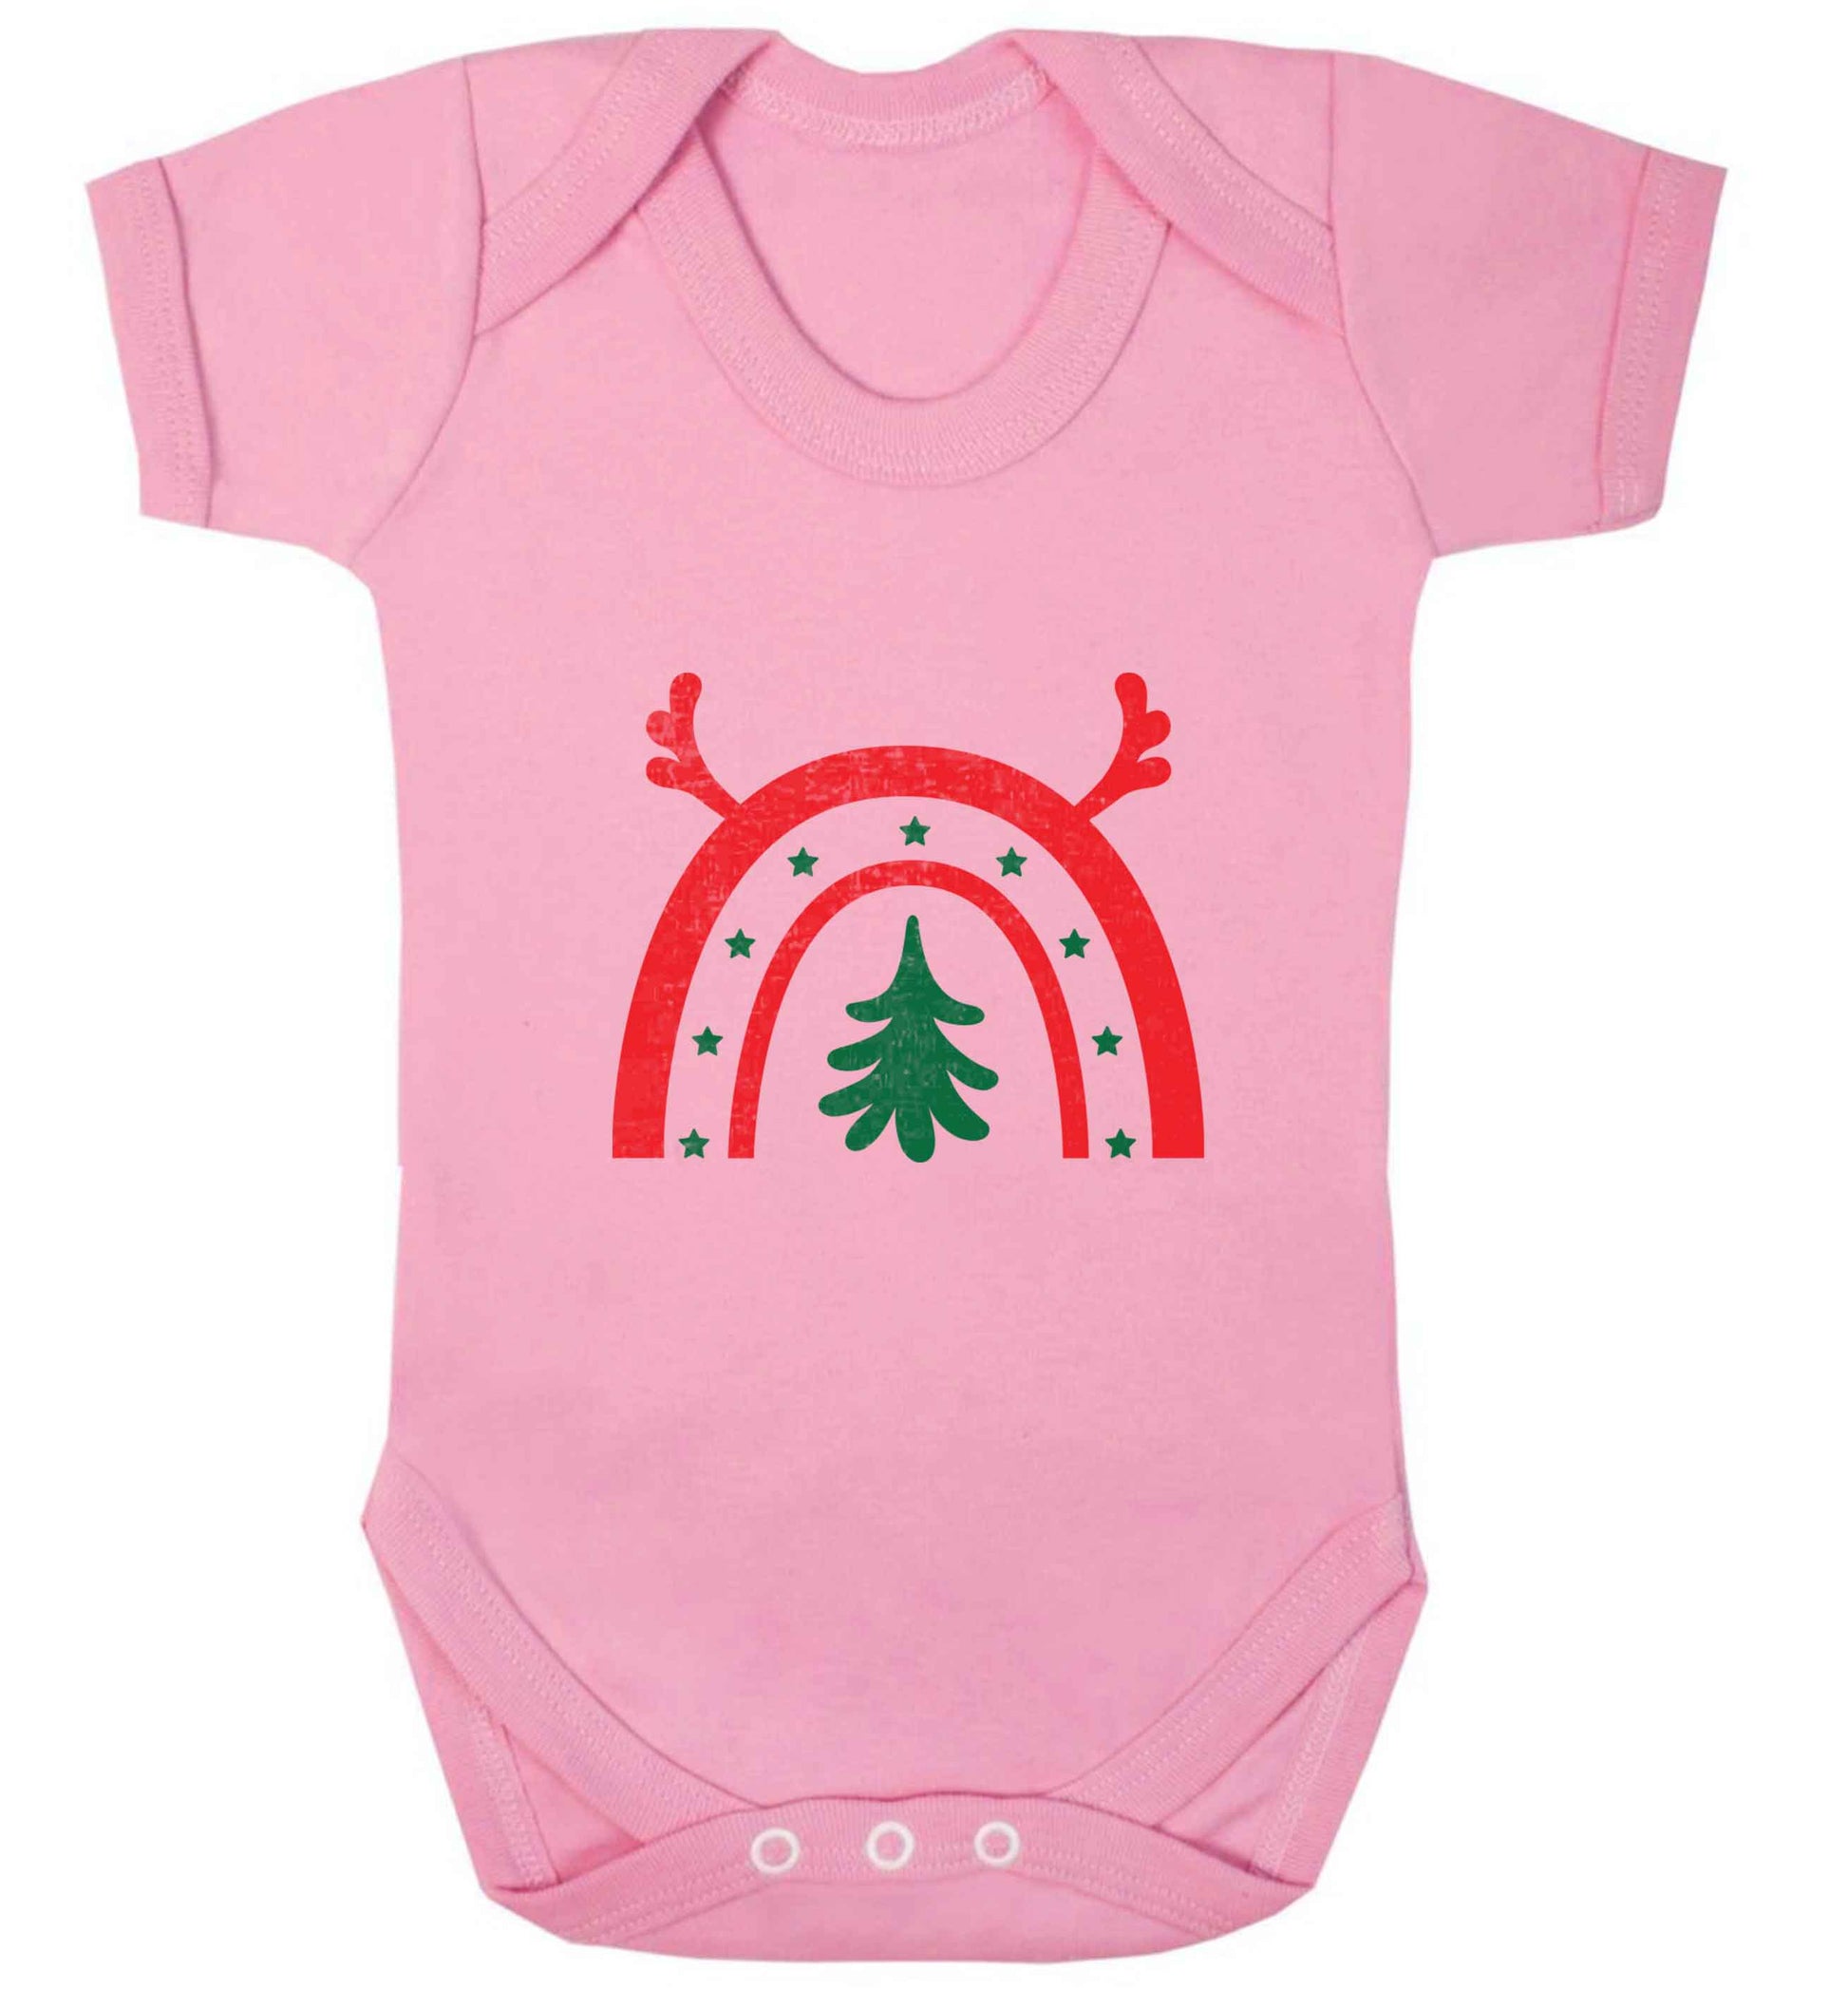 Christmas rainbow baby vest pale pink 18-24 months